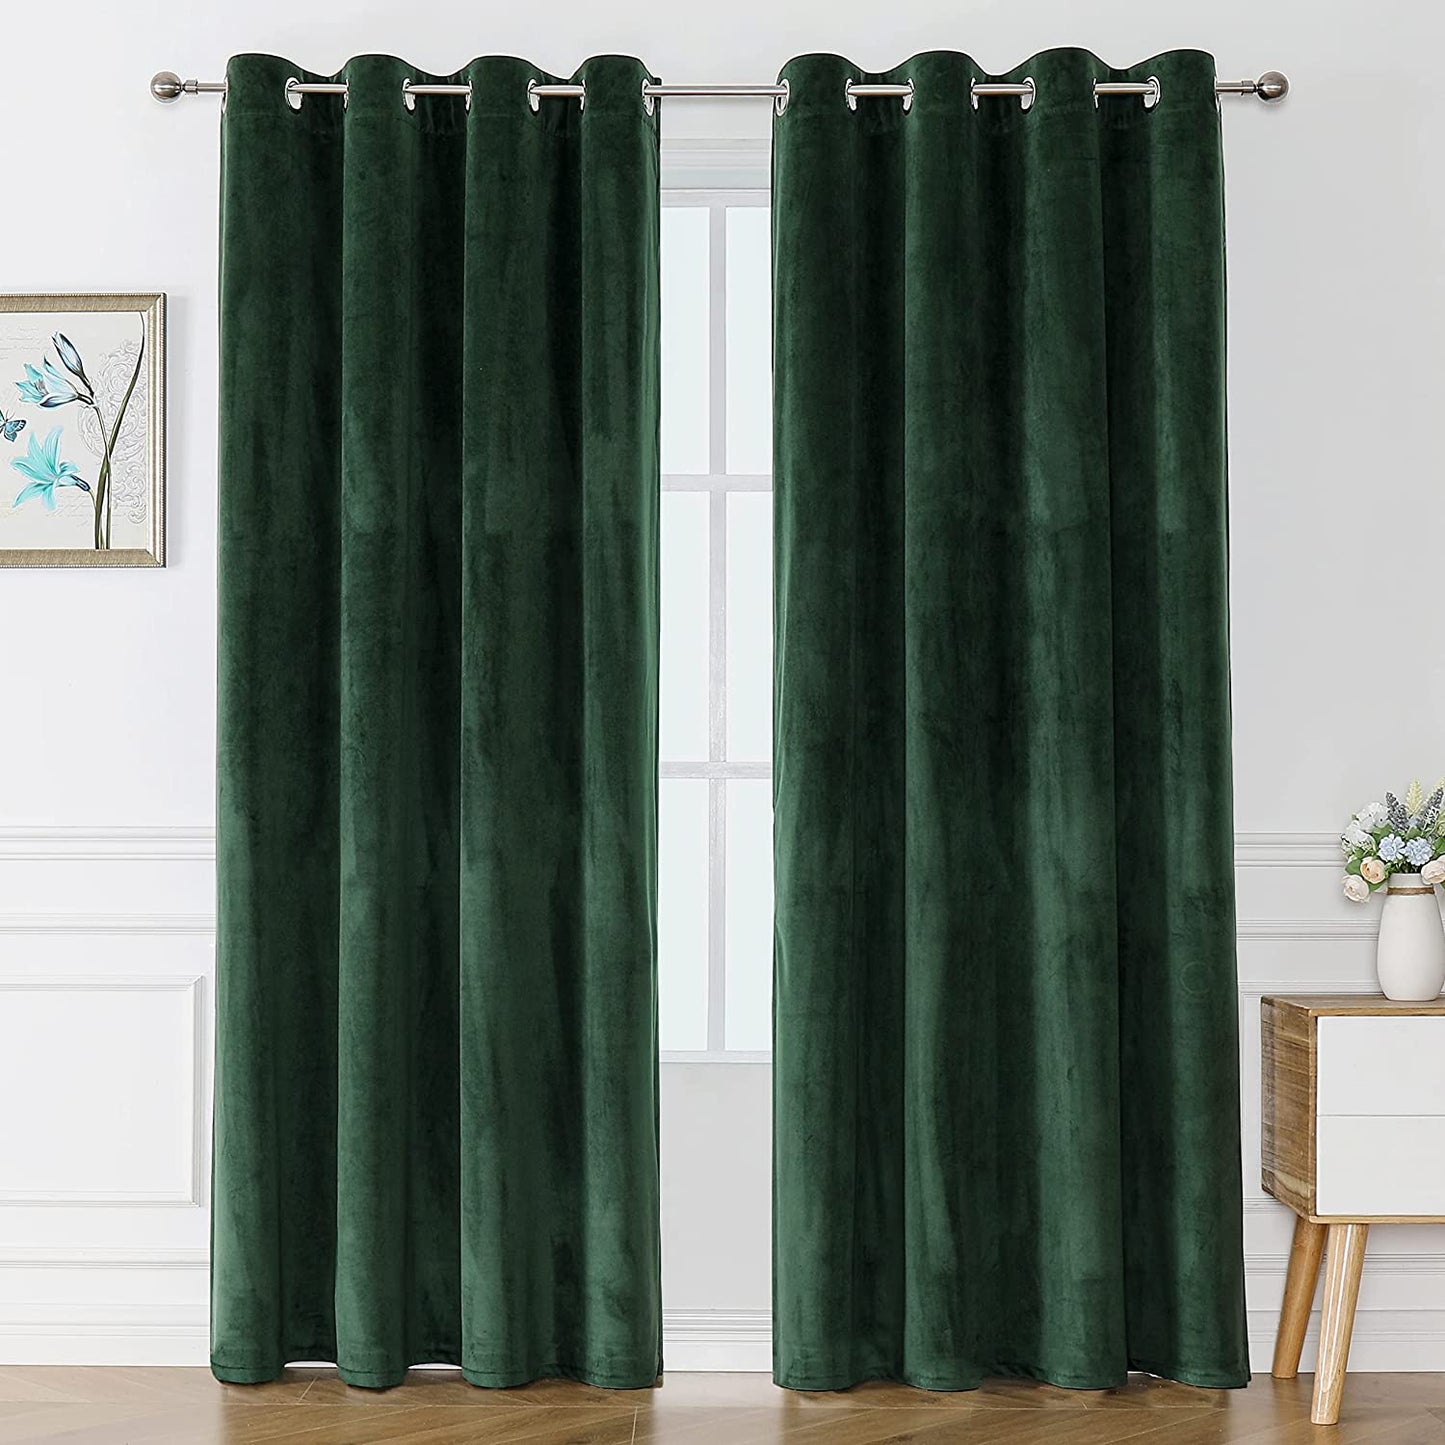 Victree Velvet Curtains for Bedroom, Blackout Curtains 52 X 84 Inch Length - Room Darkening Sun Light Blocking Grommet Window Drapes for Living Room, 2 Panels, Navy  Victree Dark Green 52 X 96 Inches 